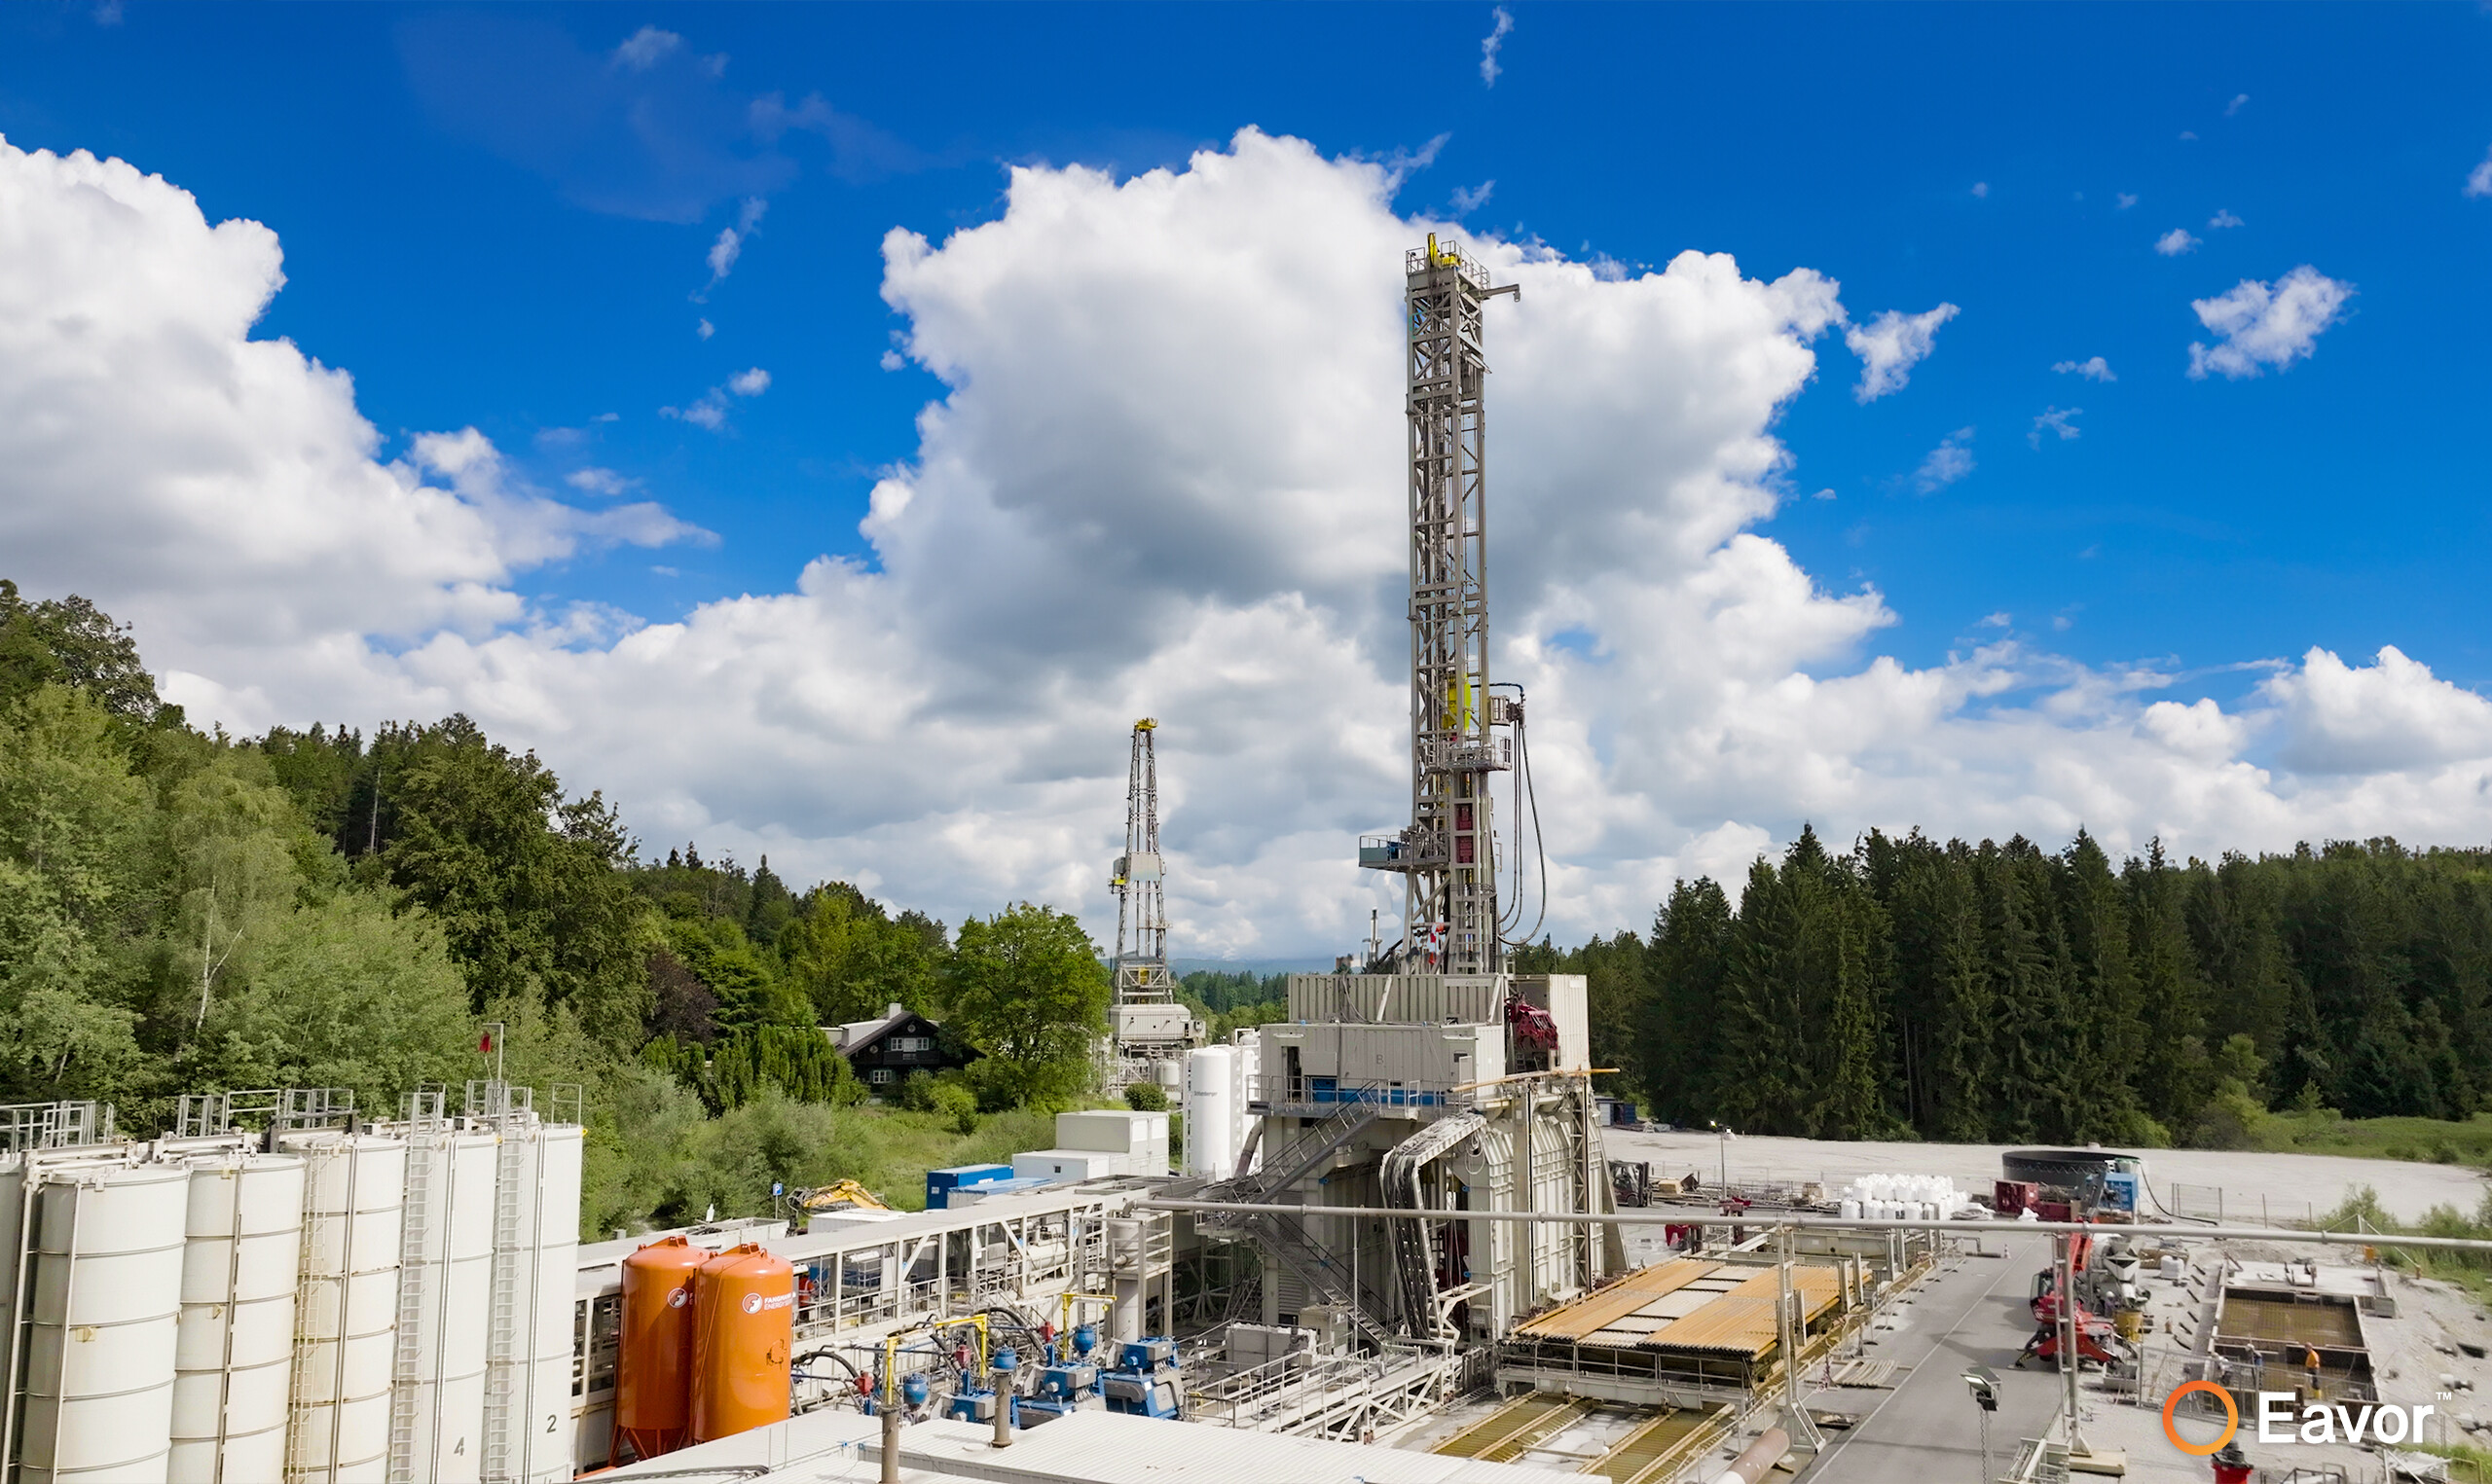 Eavor-Europe™ - Eavor's first commercial geothermal plant with a cloudy blue sky and intensely green trees in the background.